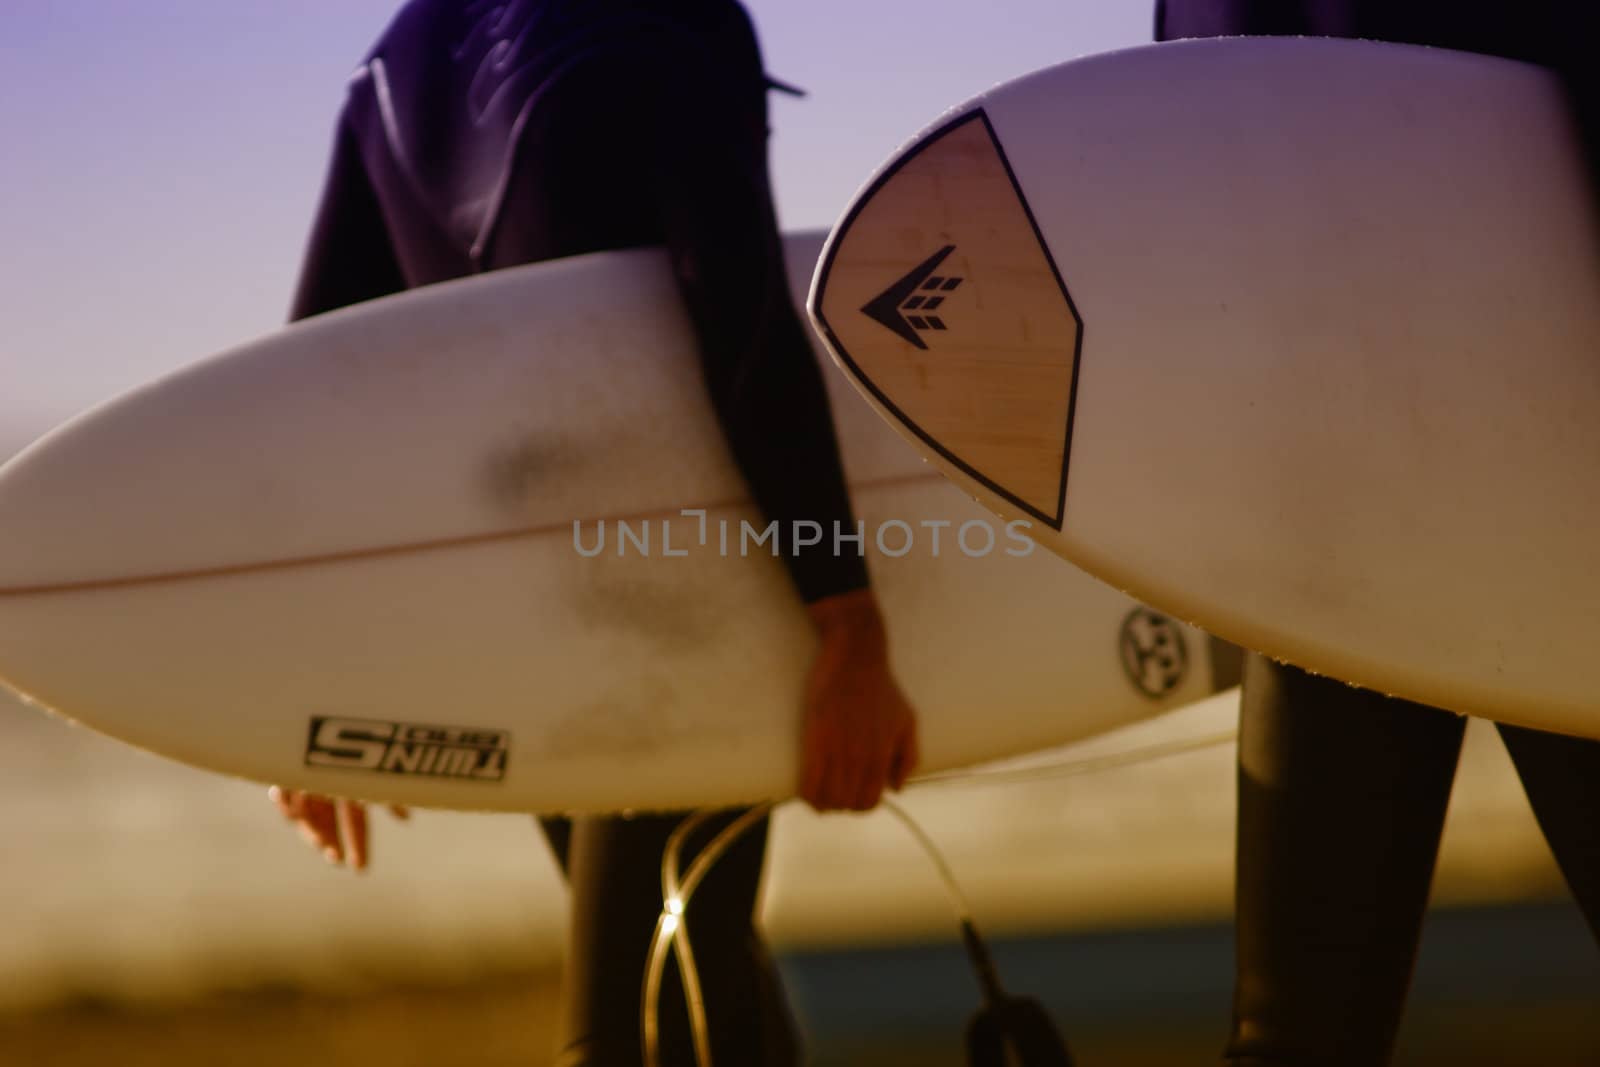 surfing, sports, extreme sports, Italy, sea, beach, waves, water, winter, surfboards, rocks, water, energy, wave, waves, weather, sea, beaches, coast, leisure, lifestyle, portrait, sport ,